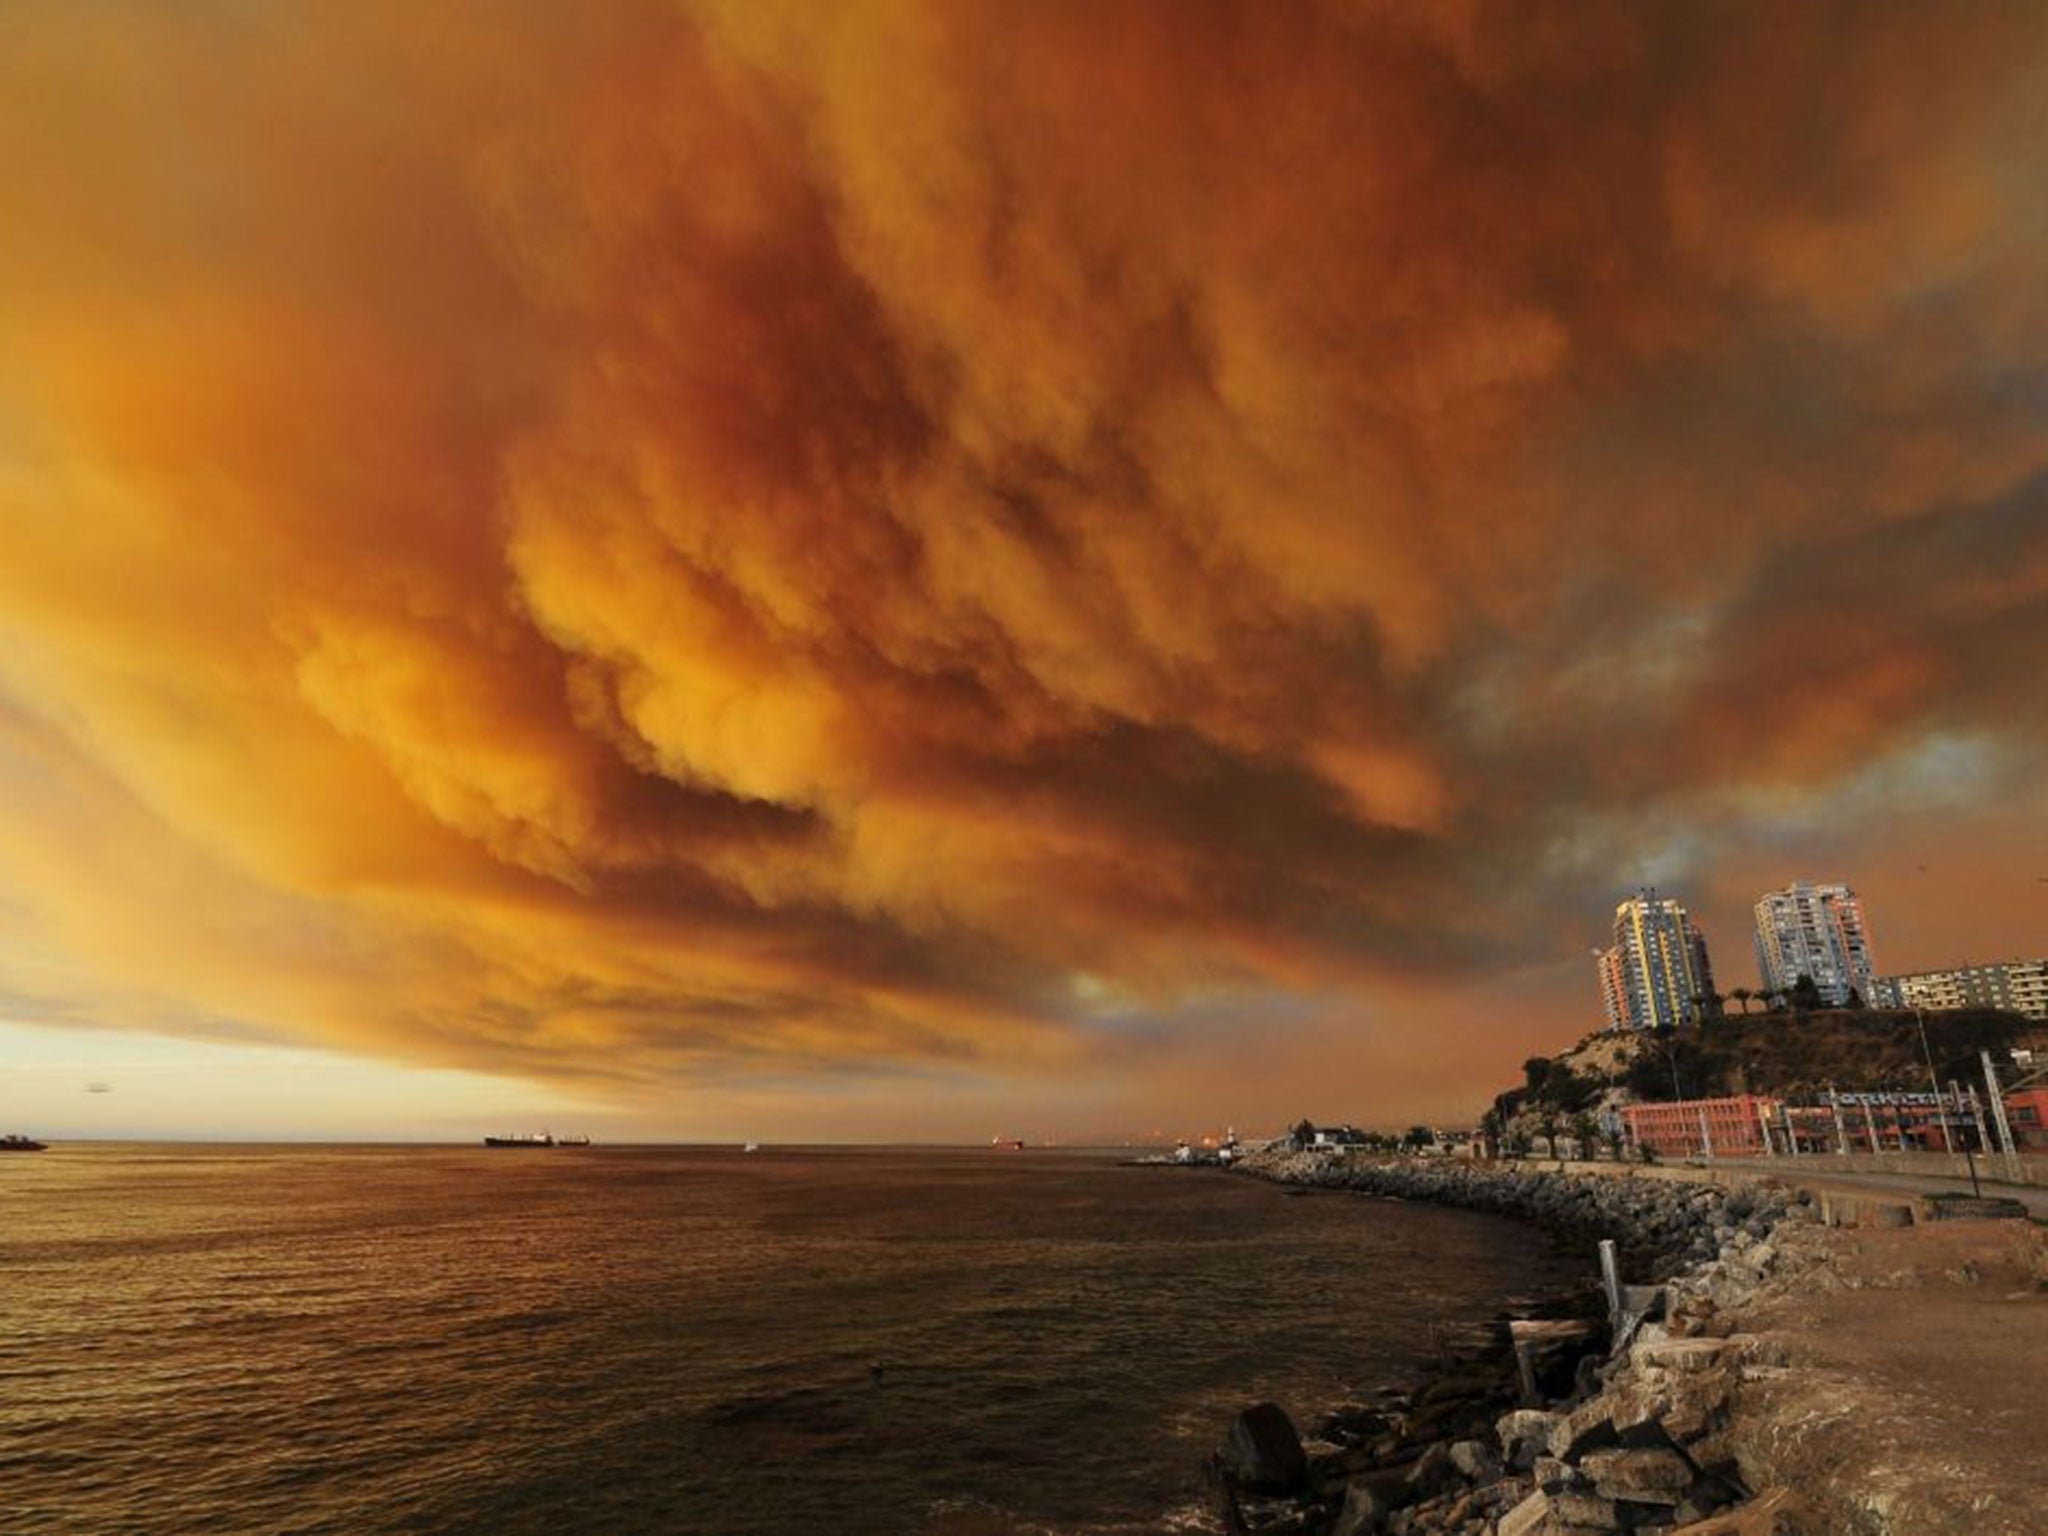 Smoke billows from the forest around Valparaiso, in Chile, on March 13, 2015 as the fire threatens to reach the city's port.